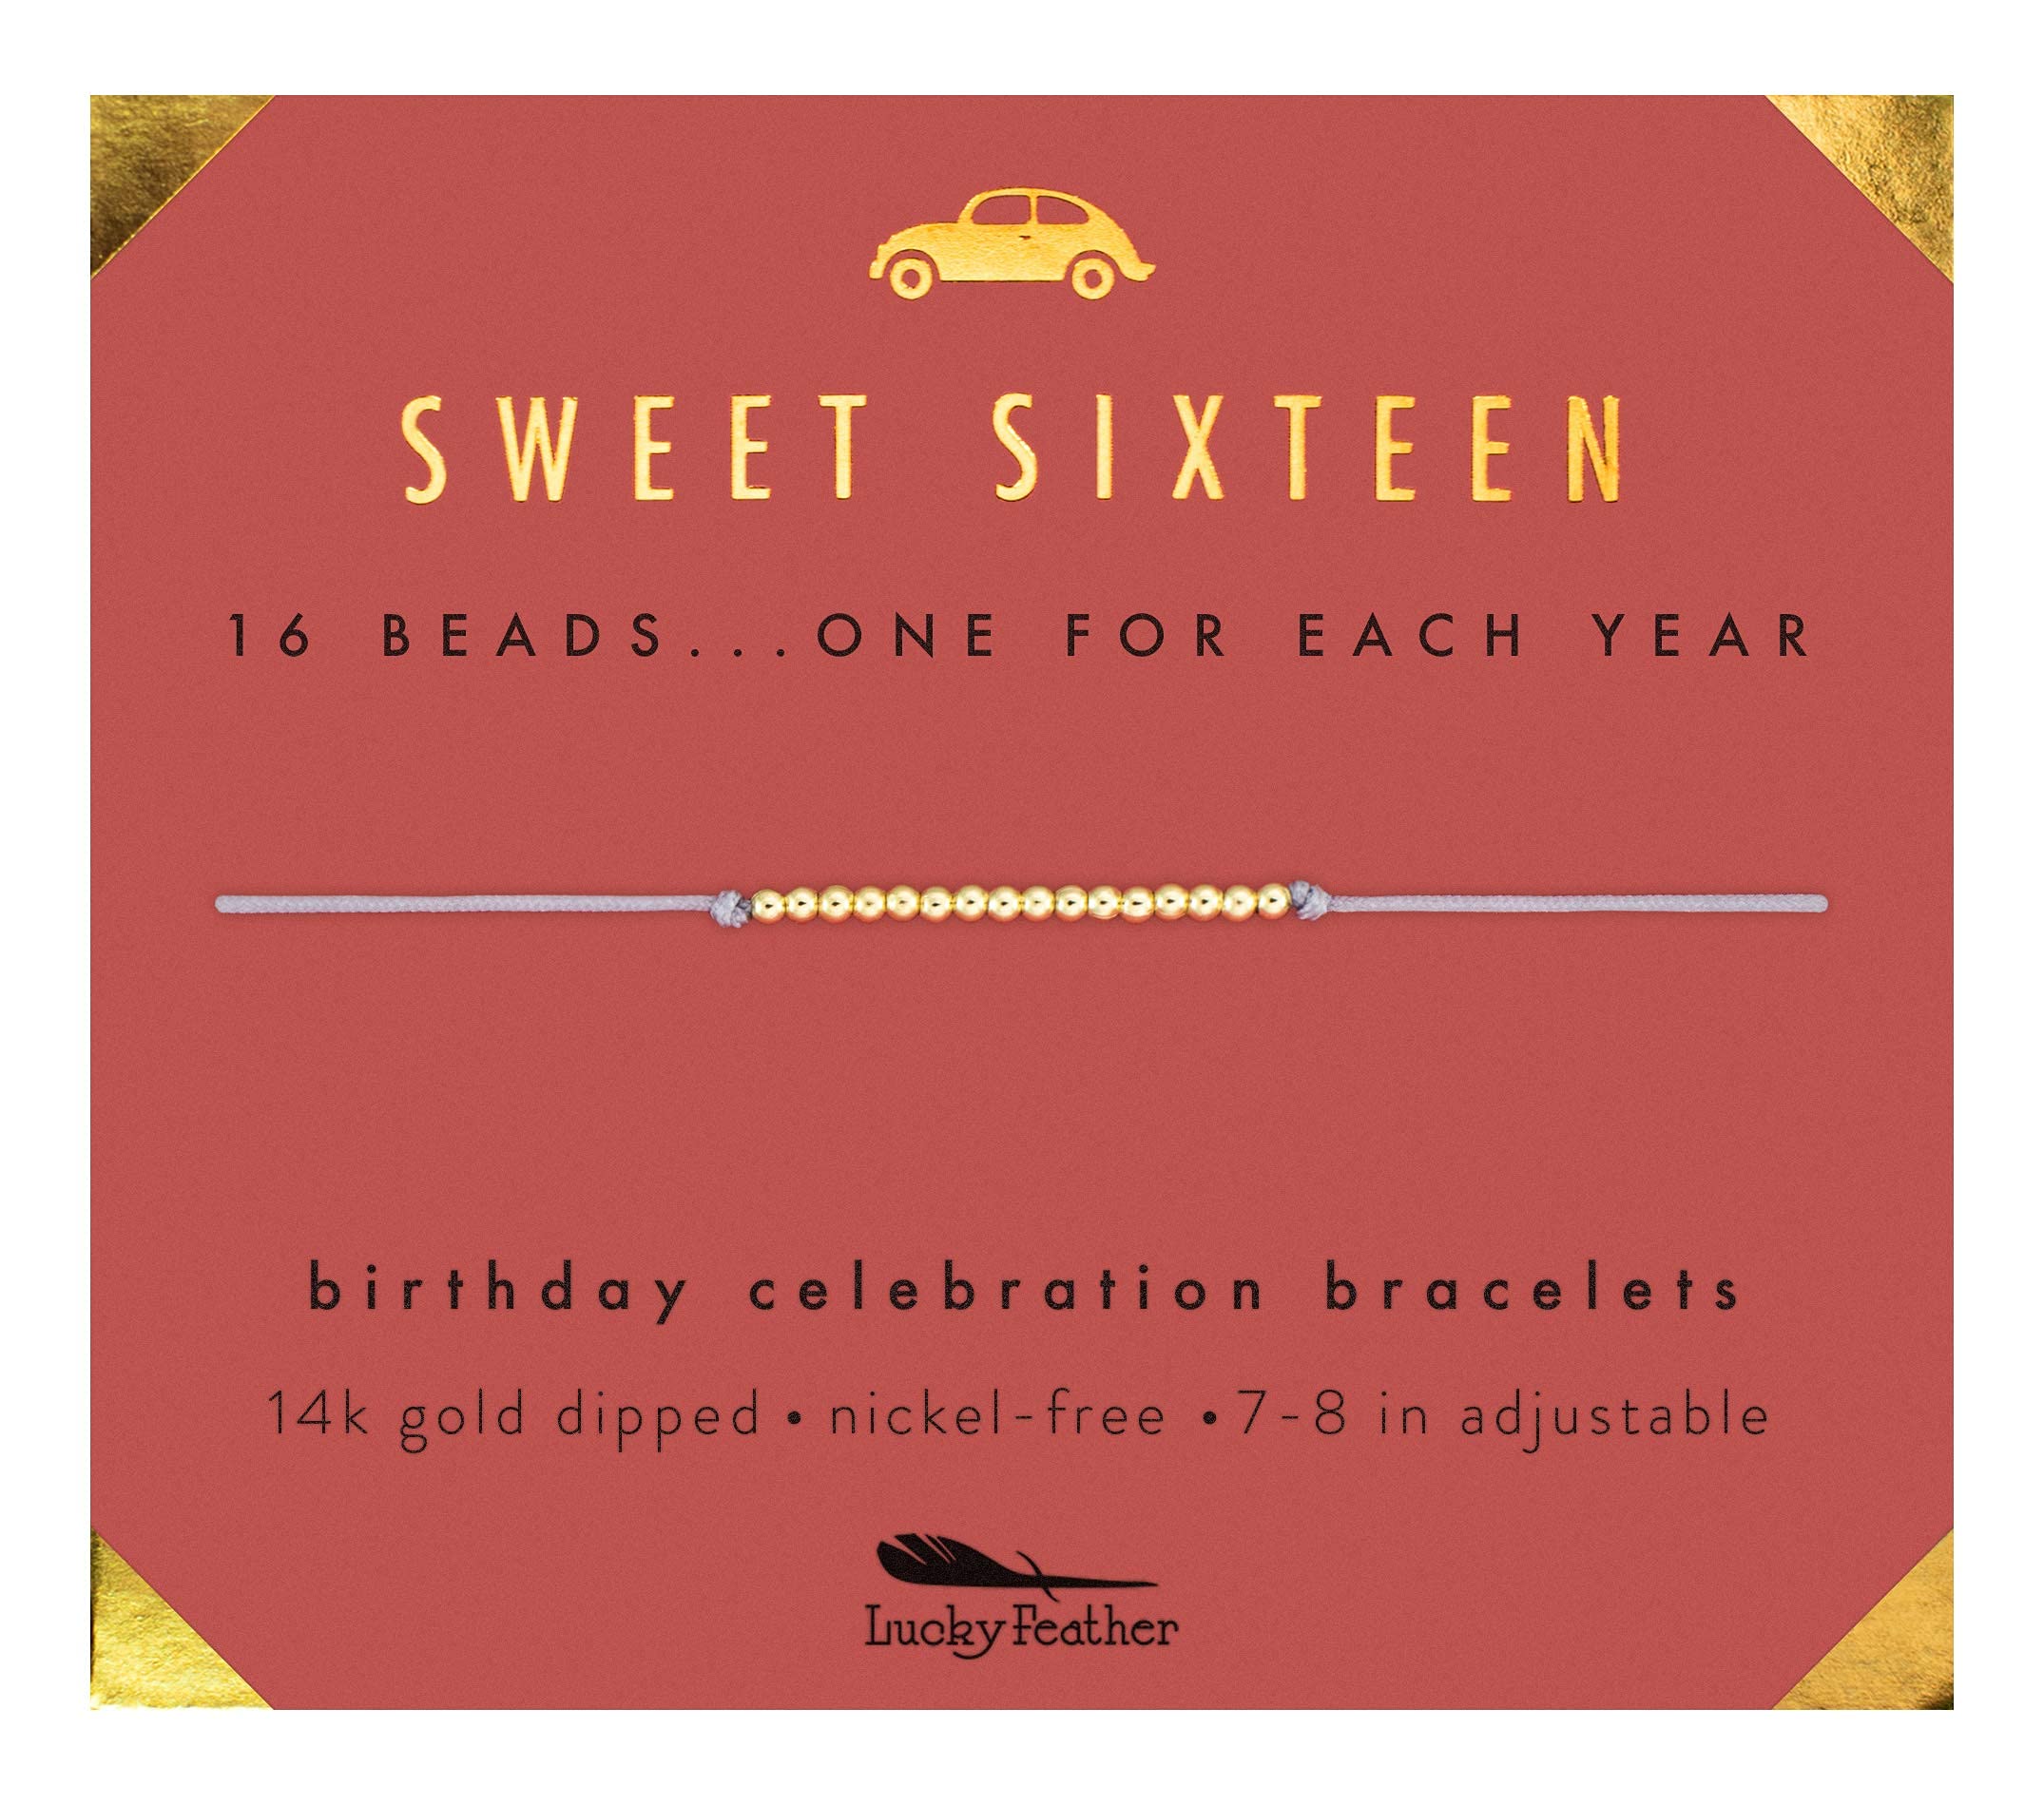 Book Cover Lucky Feather Sweet 16 Gifts for Girls; 16th Birthday Bracelet Gift Idea for 16 Year Old Girls with 14K Gold Dipped Beads on Adjustable Cord